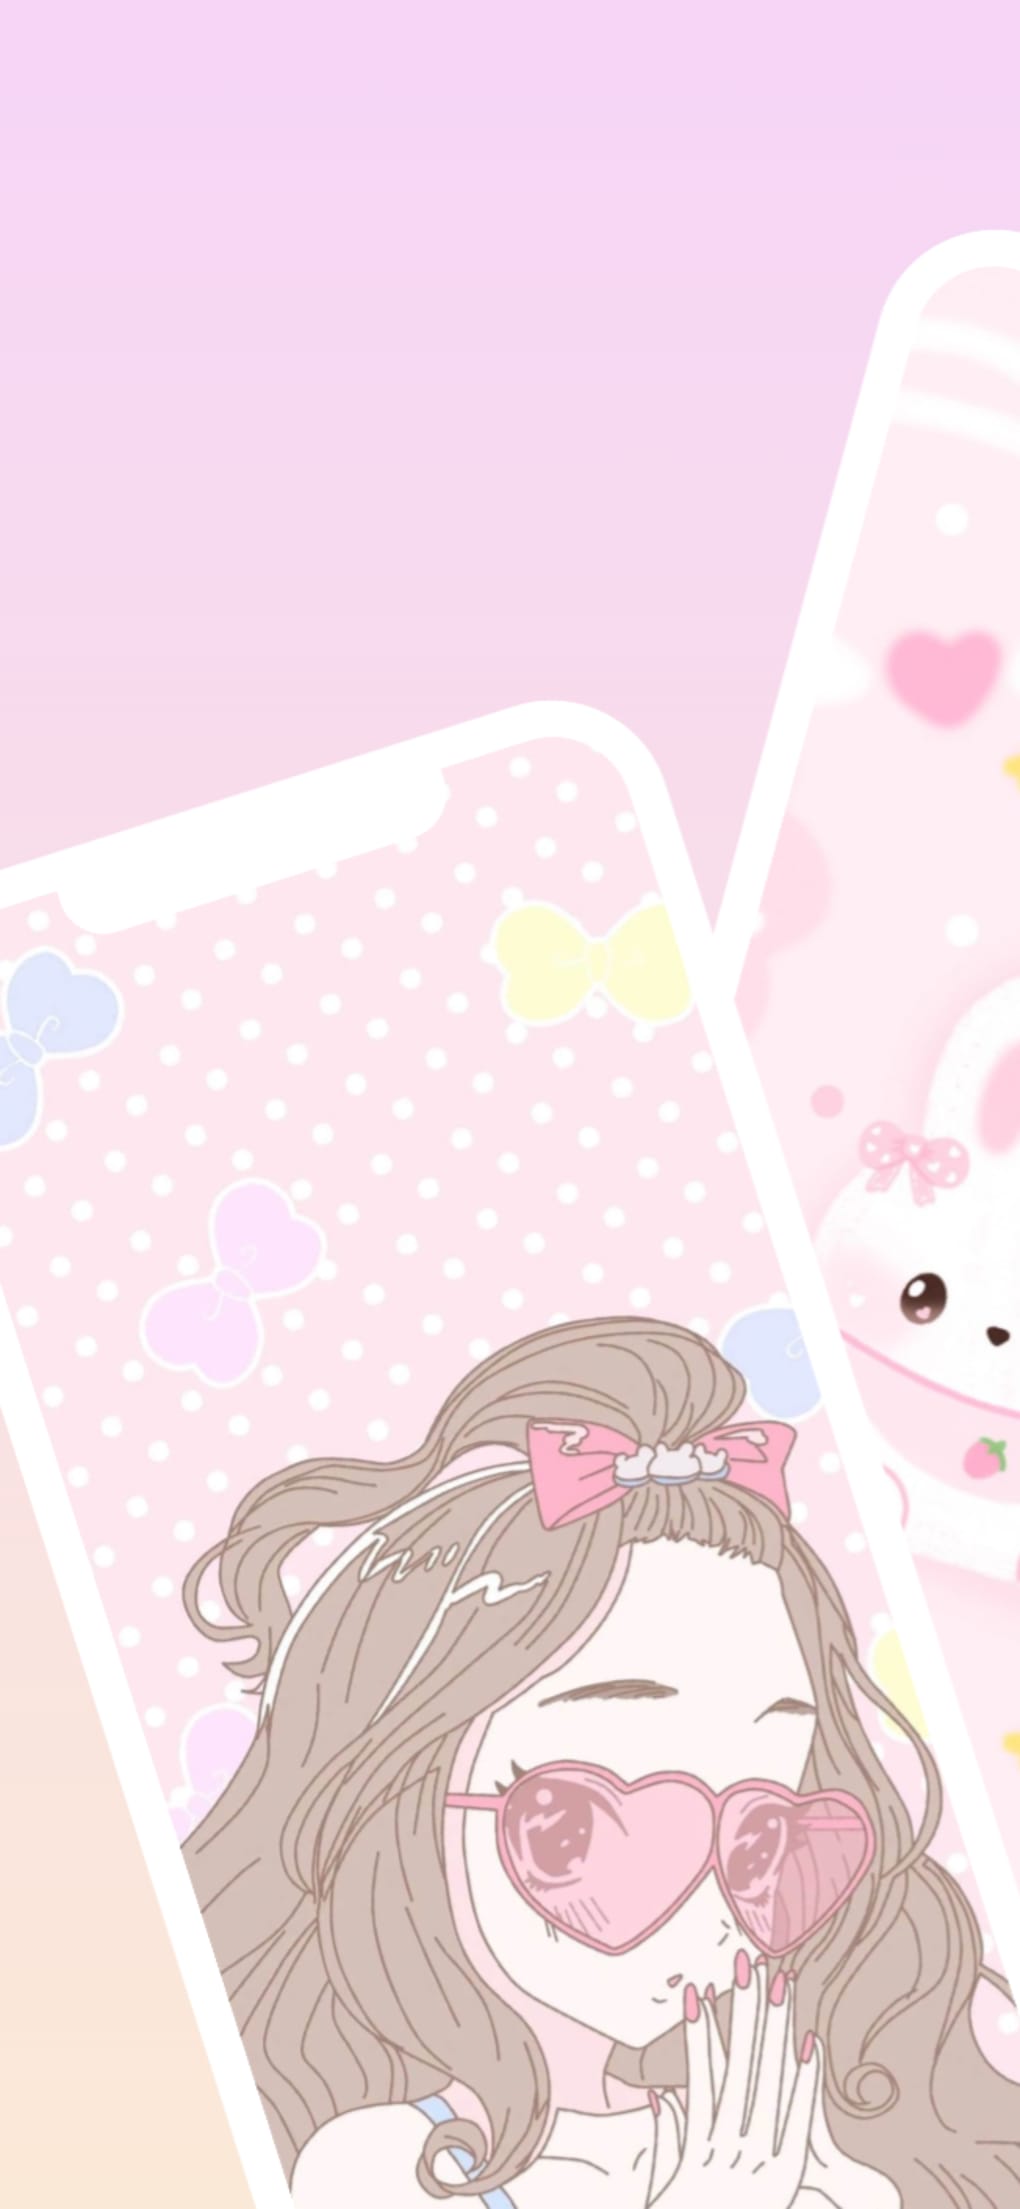 A phone with a wallpaper of a girl with pink glasses and a pink bow in her hair. - Android, kawaii